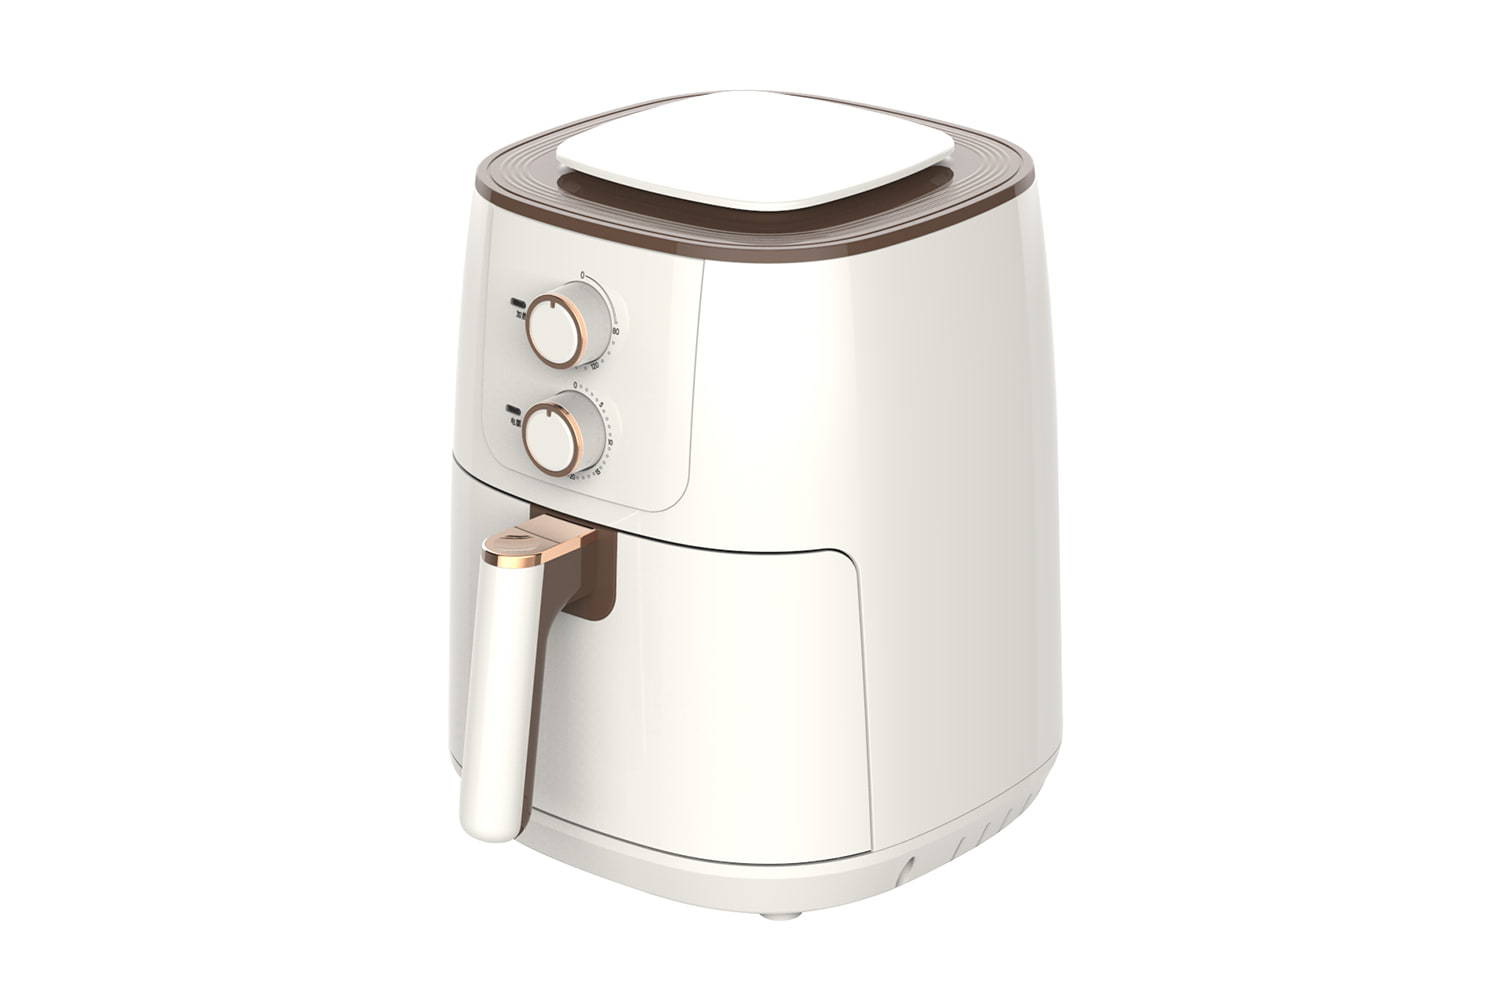 YAF-45ZJ01 4.5L AIR FRYER, Oil-Free, Easy Operation with Simple Knob Controls for Frying, Roasting, Grilling, Baking